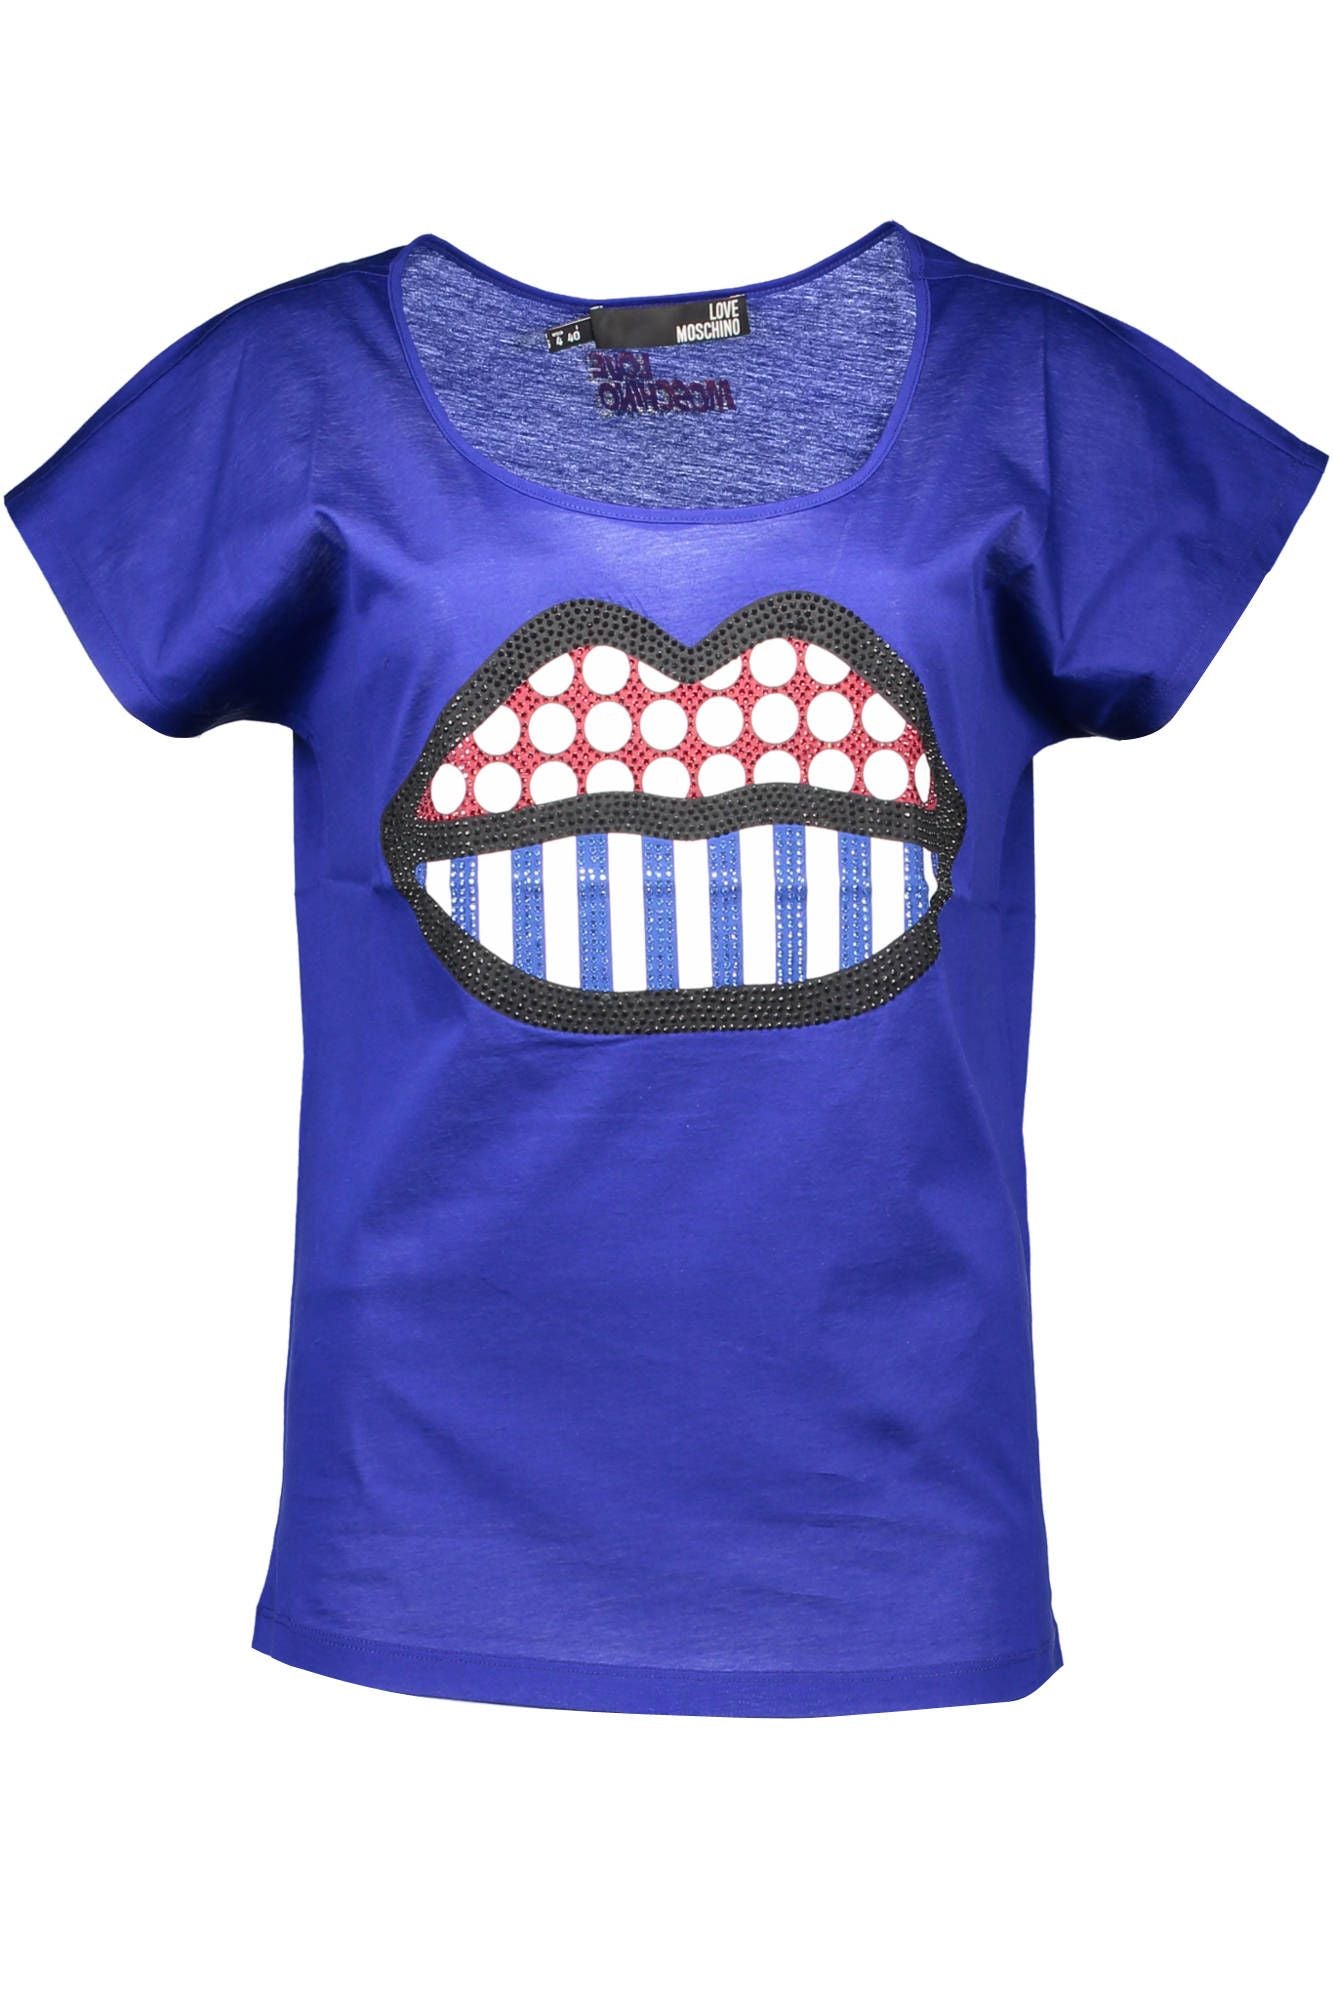 Chic Blue Logo Tee with Wide Neck